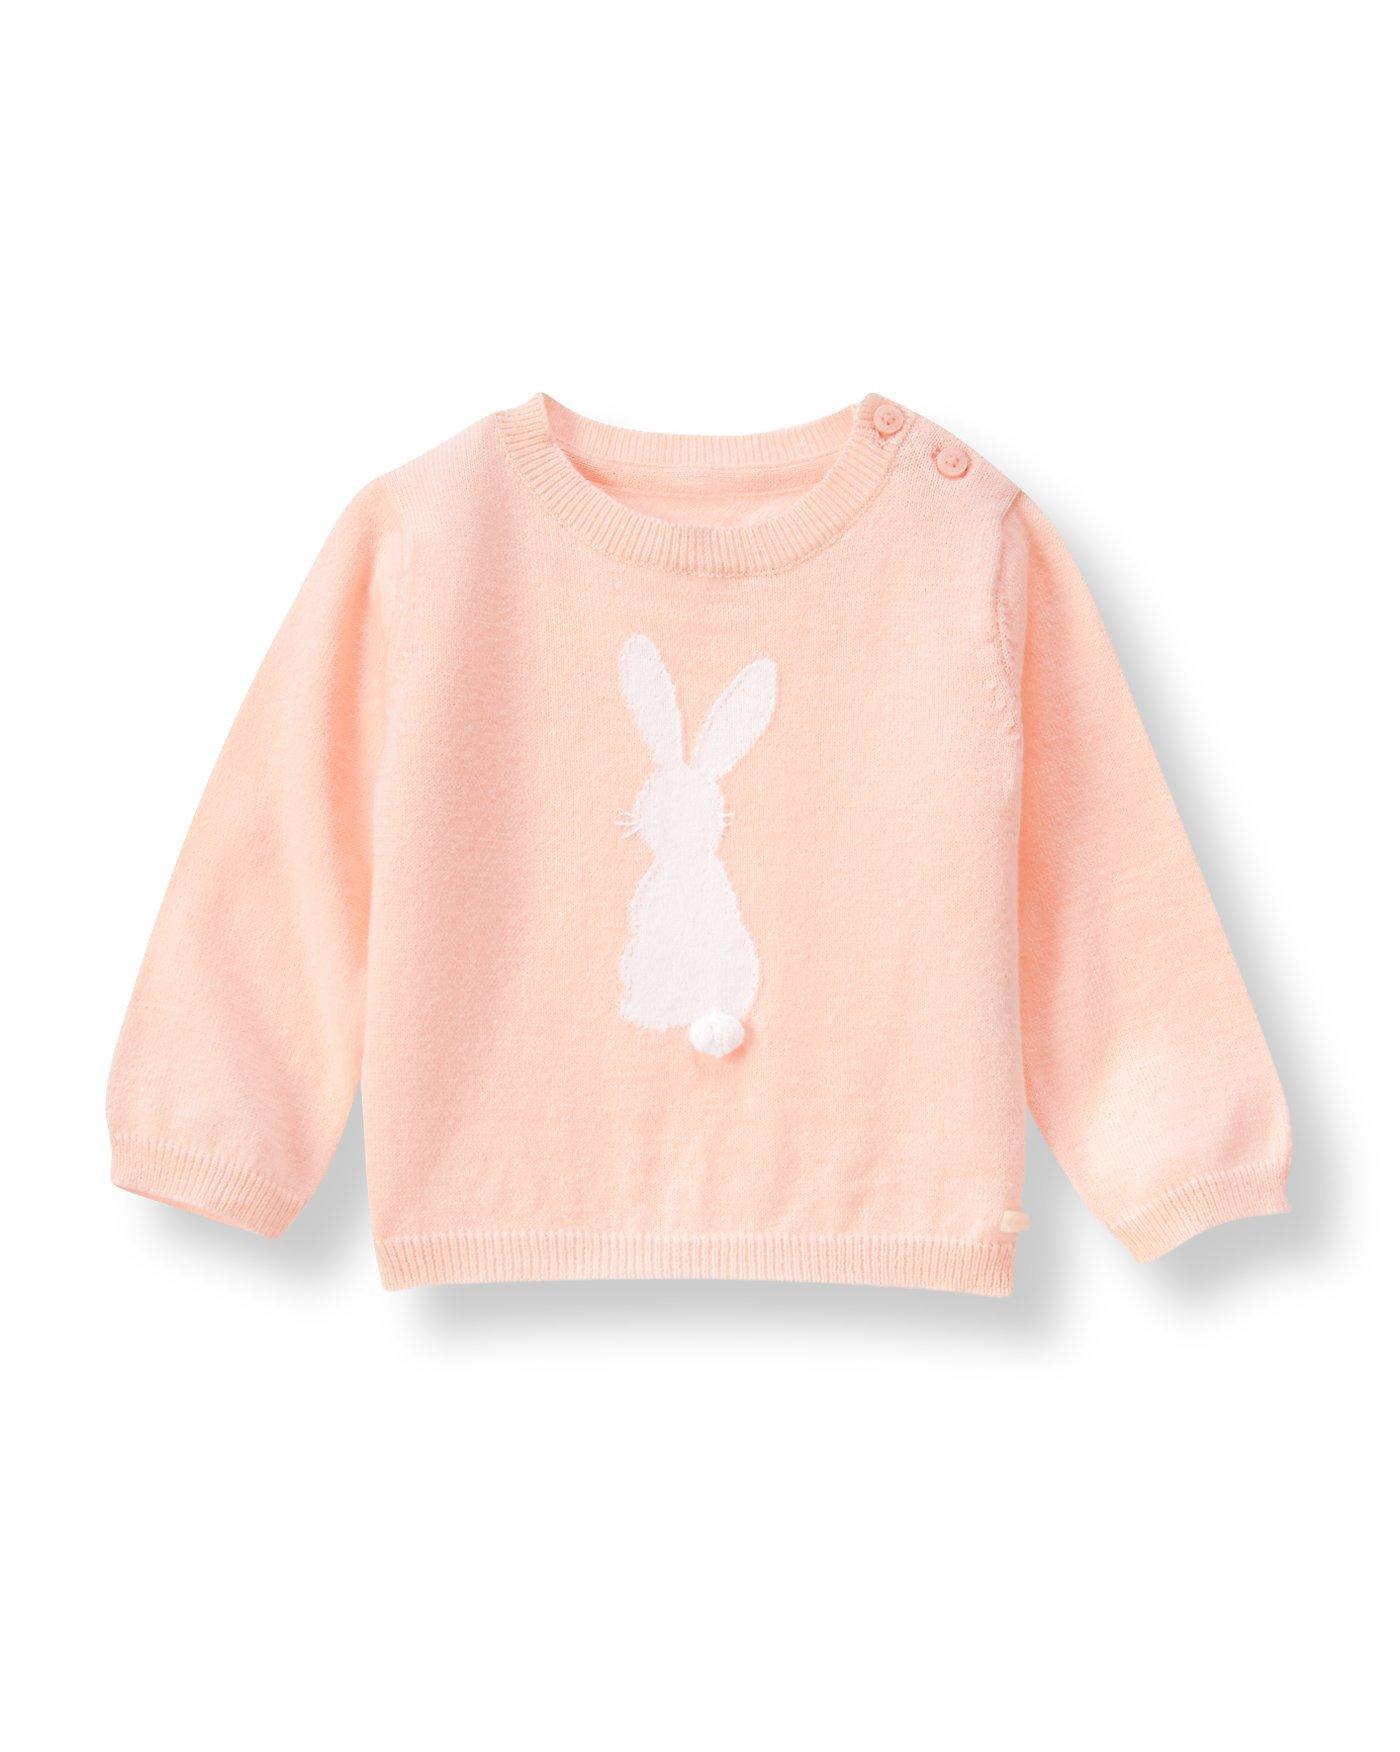 Bunny Sweater image number 0